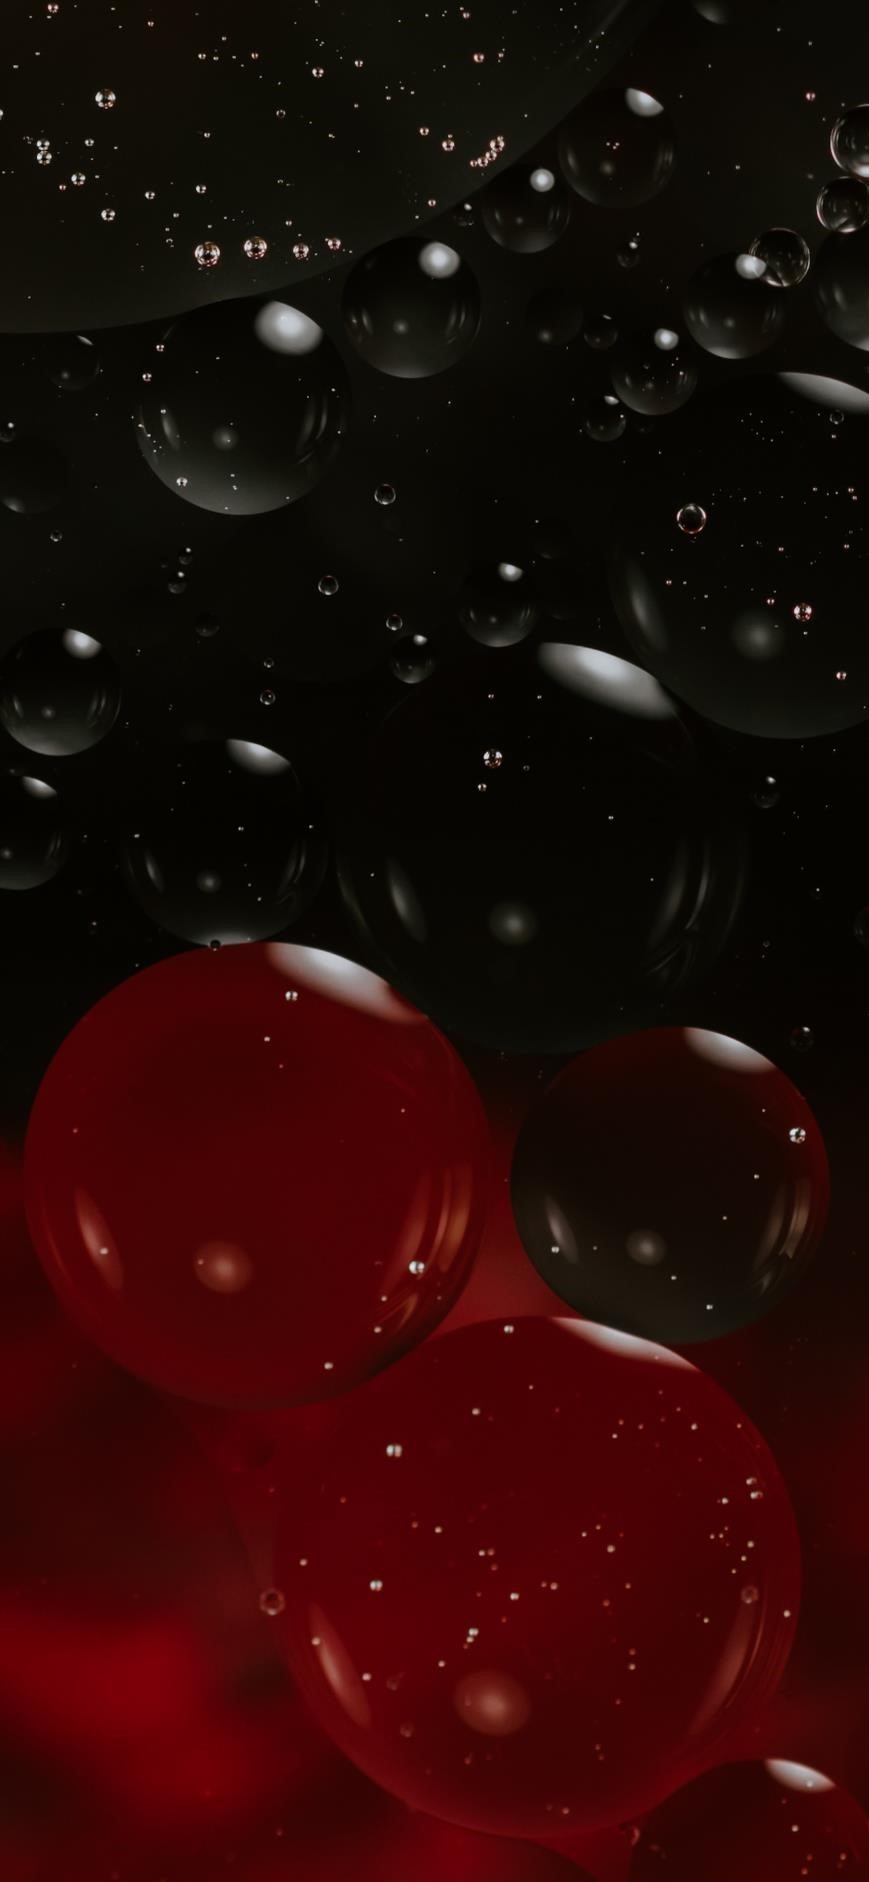 Black and Red Iphone Wallpaper 2